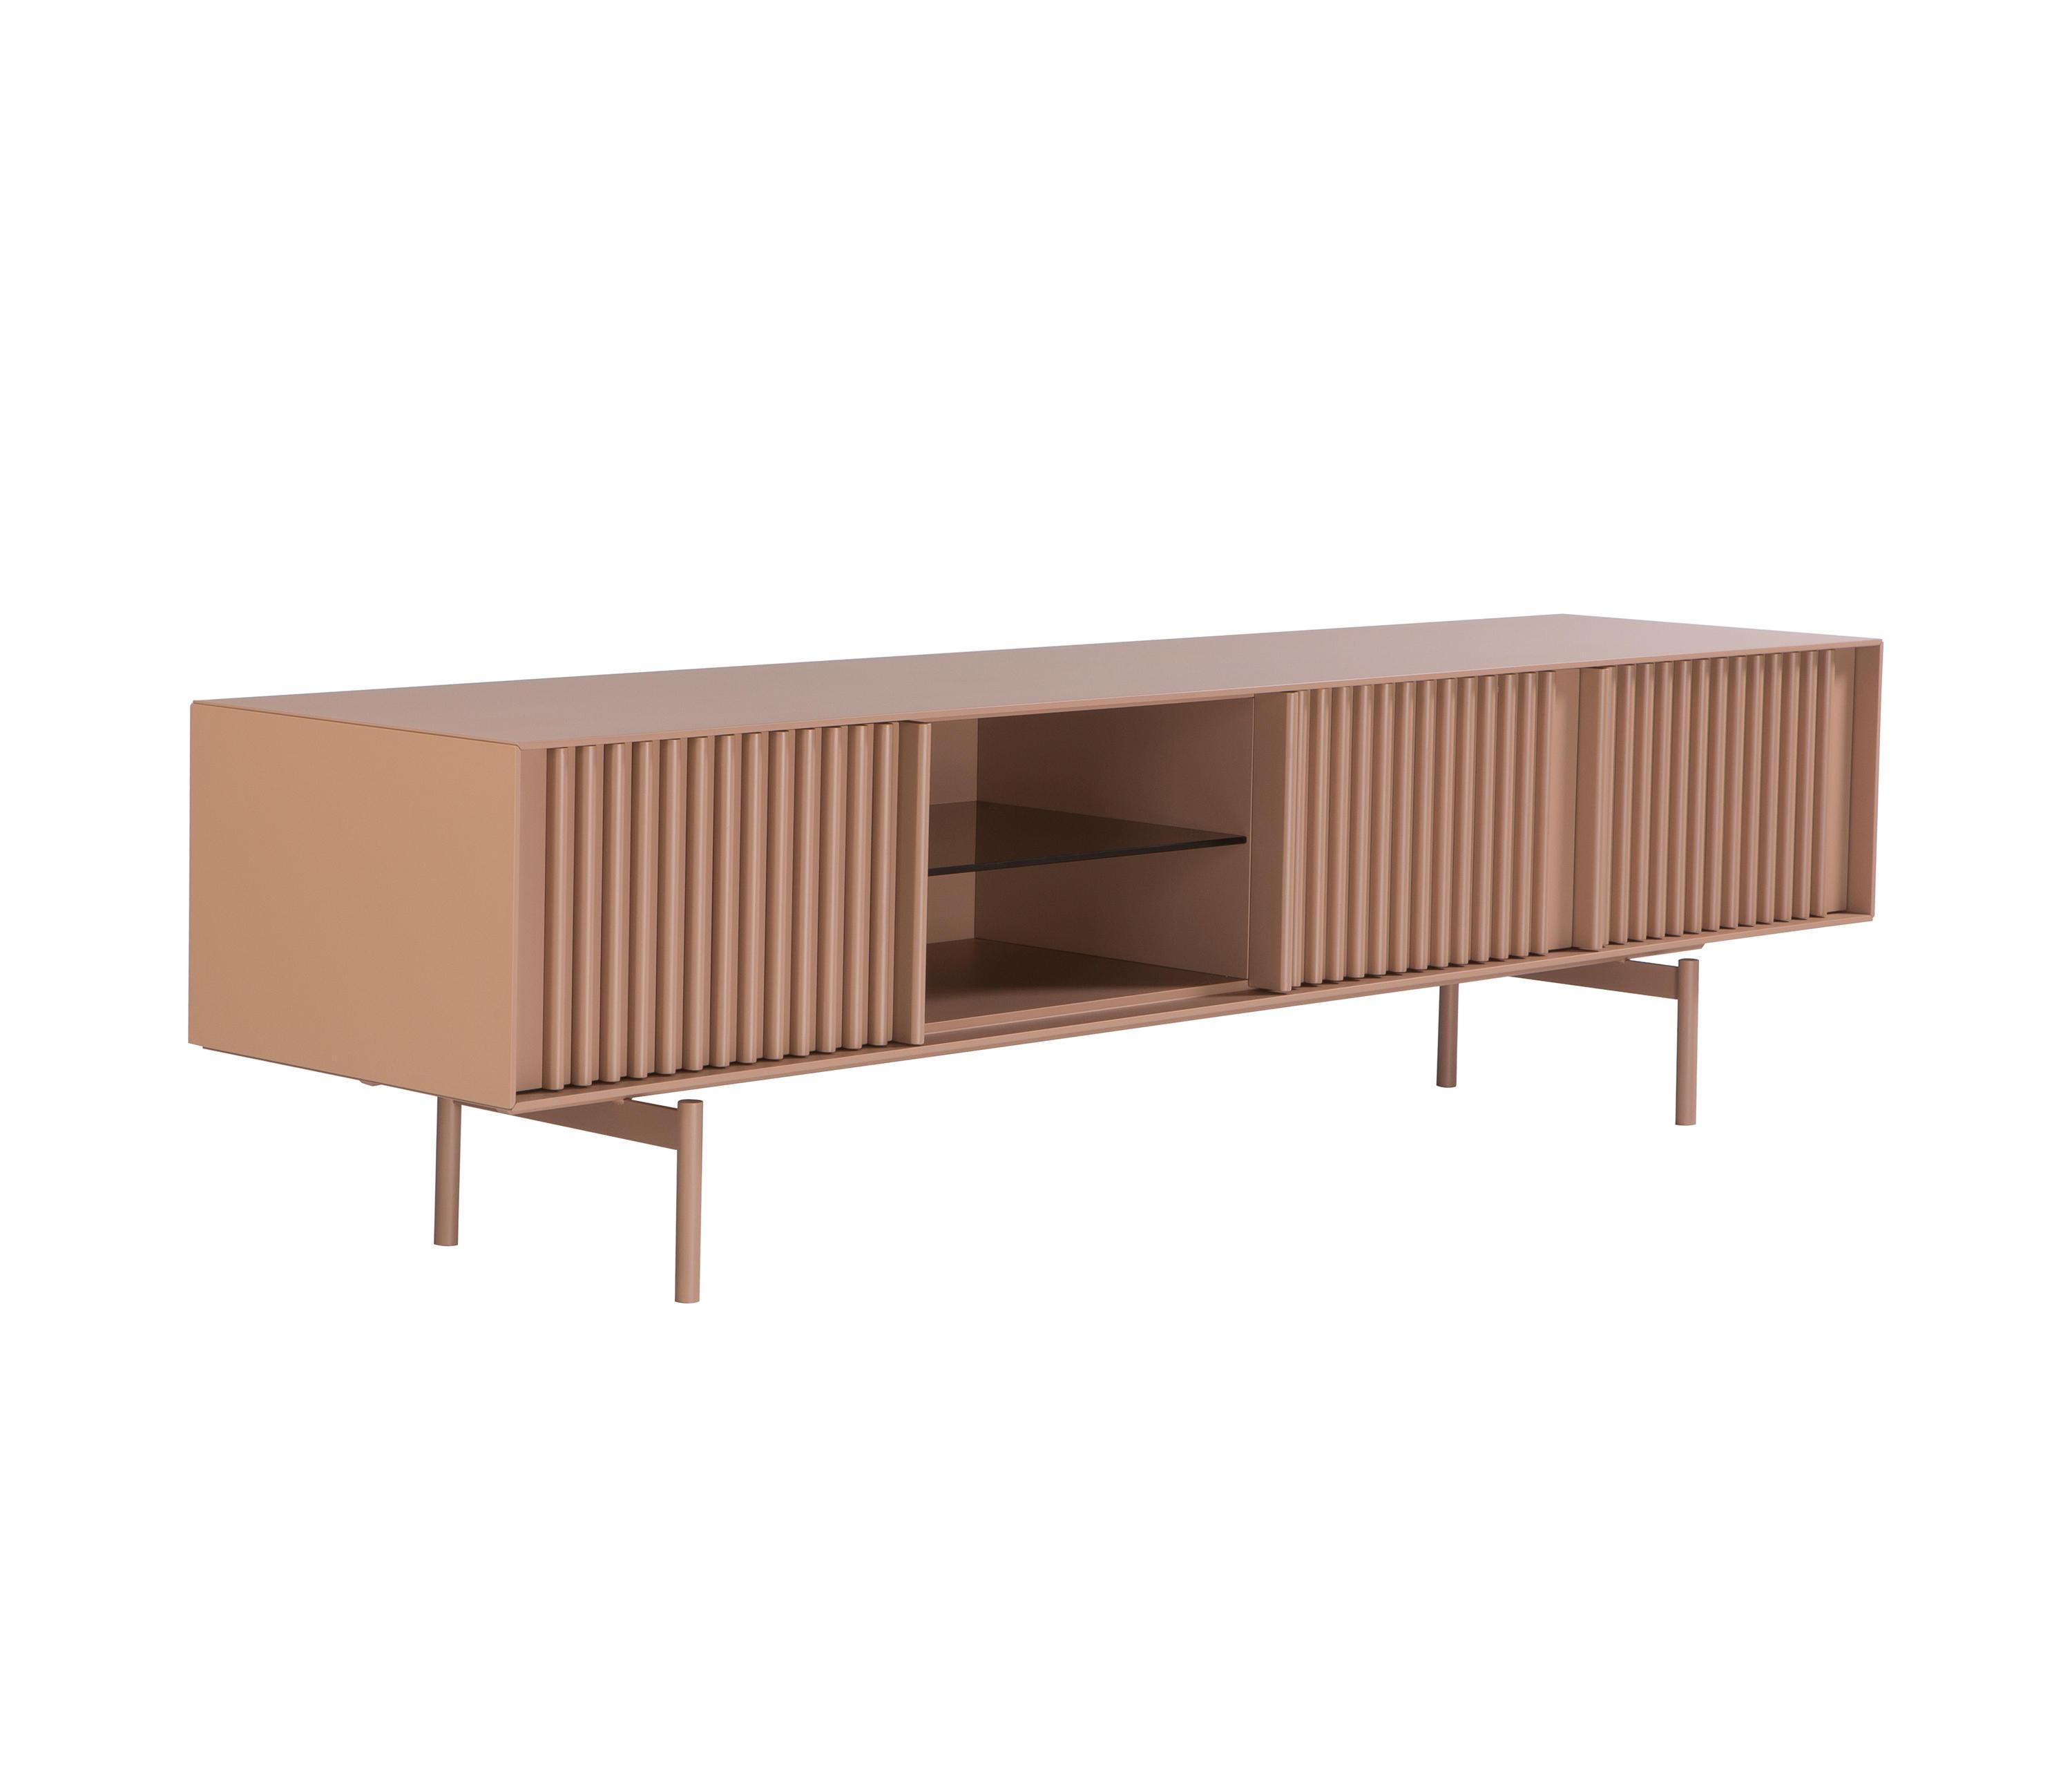 Depending on the chosen material, the TV unit can have a classic and at the same time a more pop character.
Materials : Fronts lacquered, The base is metallic. 
Available in different sizes and finishes.
The price is subject to change by choosing